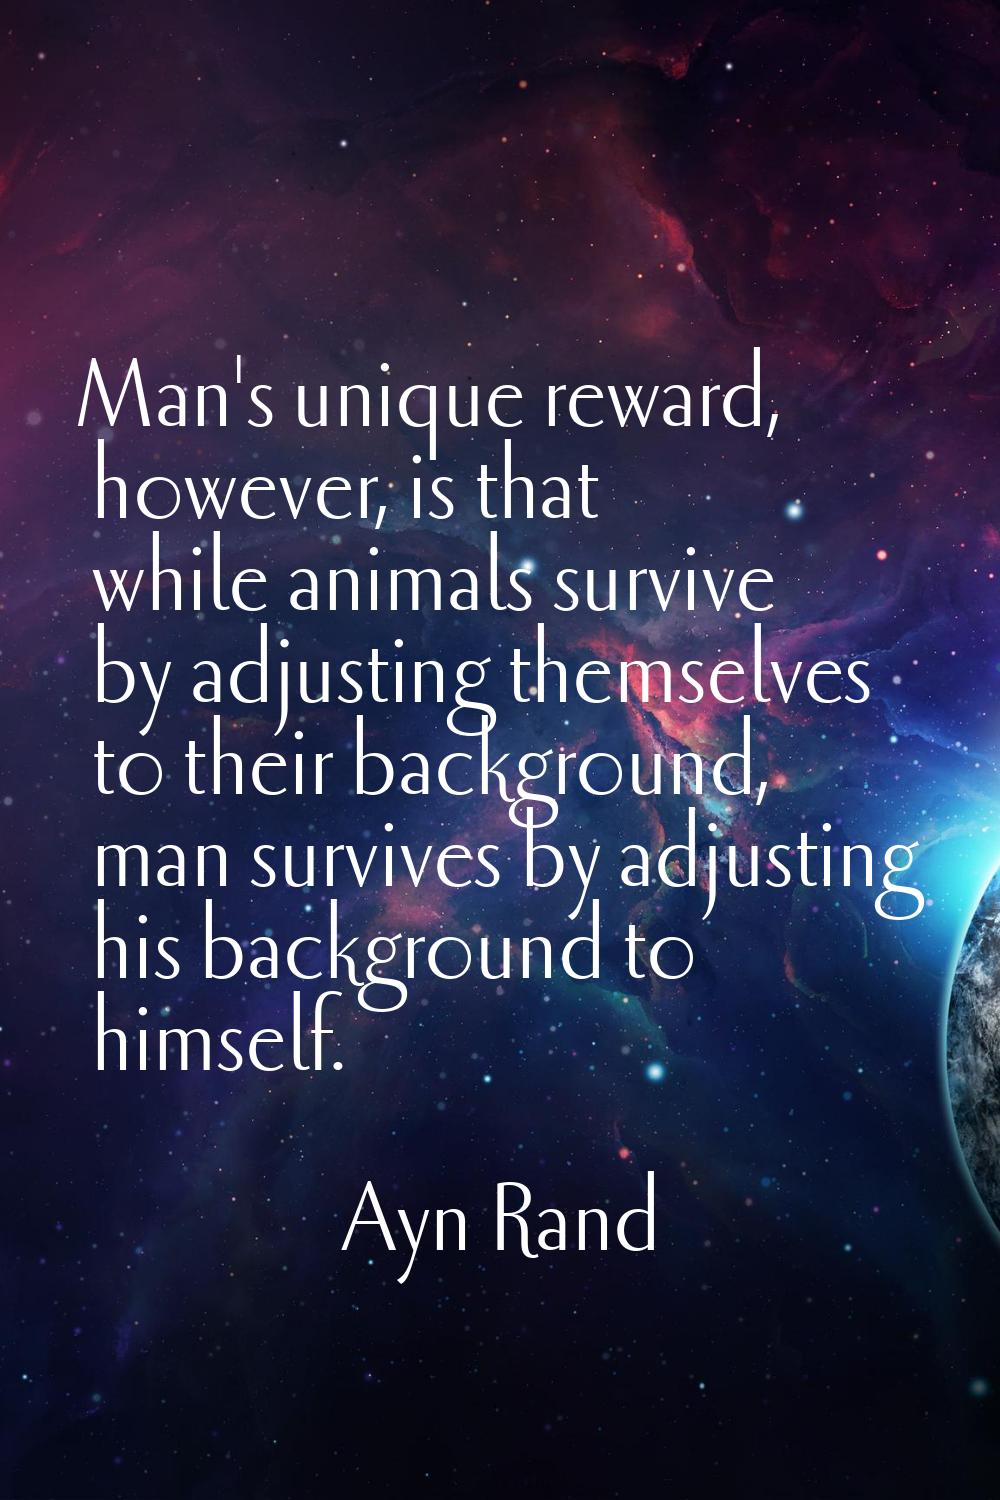 Man's unique reward, however, is that while animals survive by adjusting themselves to their backgr